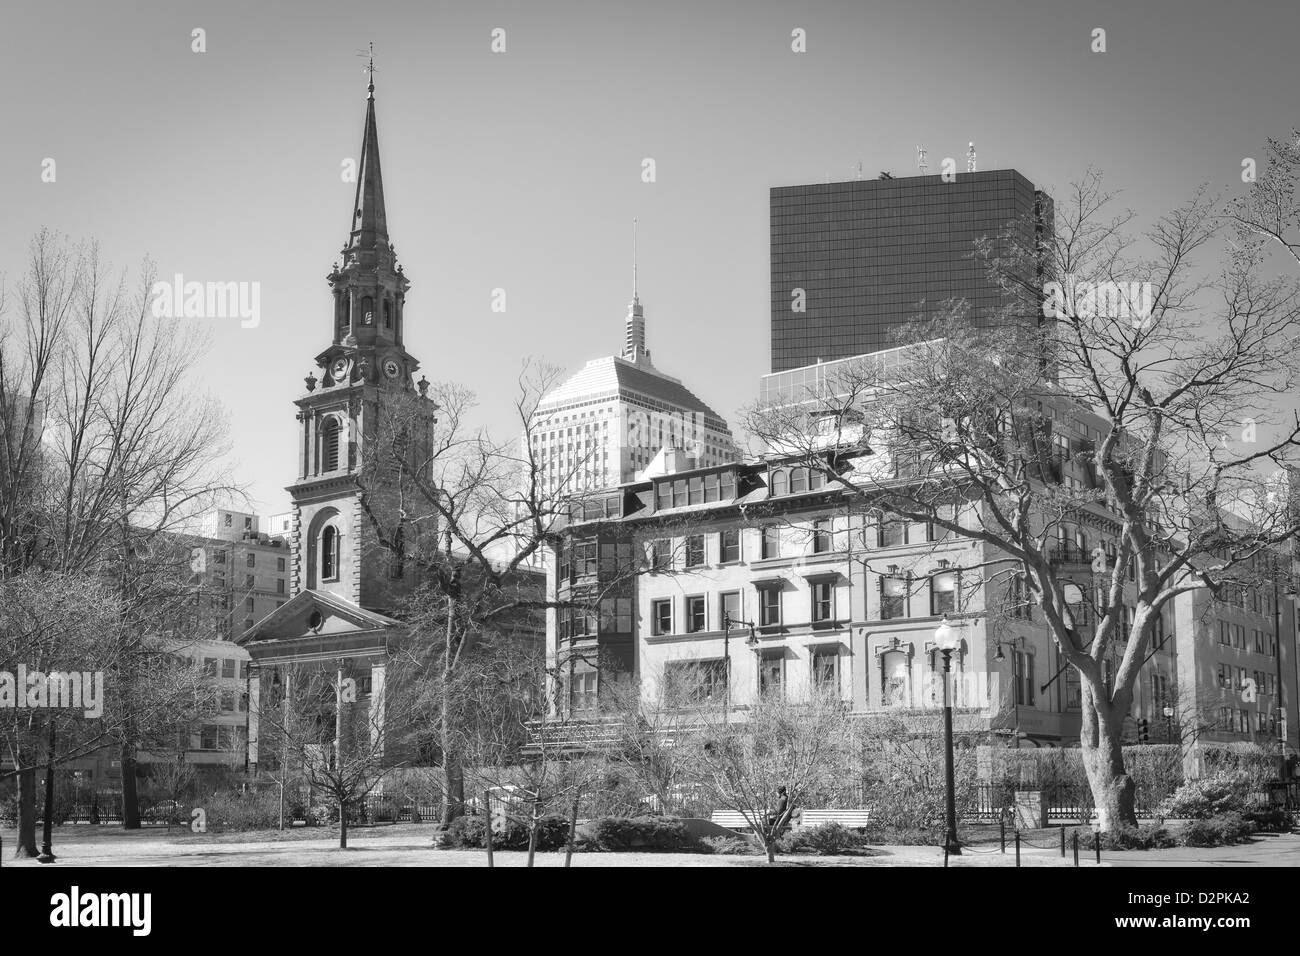 Black and White Image of Back Bay Boston, with the a church and the city in the background. Stock Photo